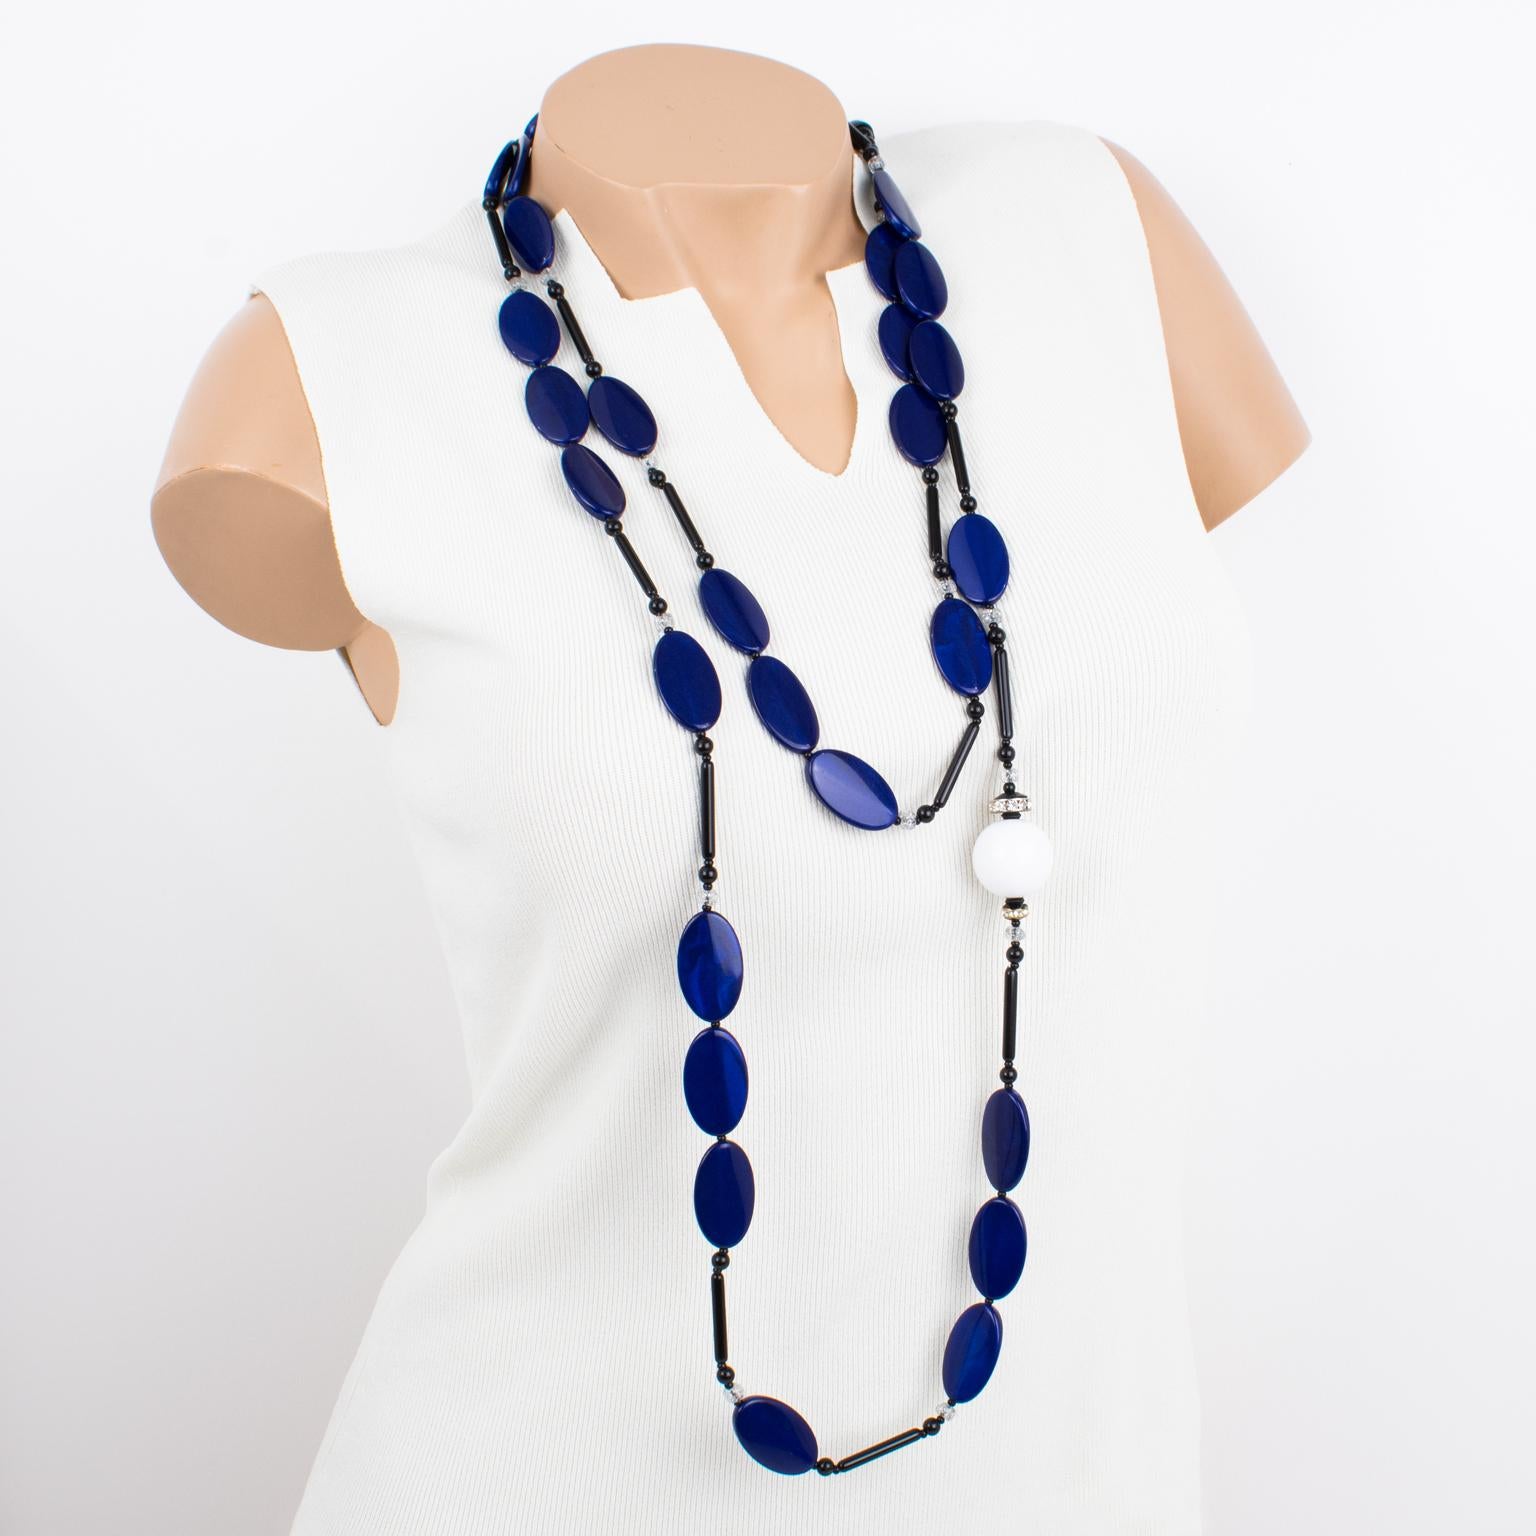 This stunning Angela Caputi necklace features a giant extra-long beaded design built with faux-lapis blue flat oval elements, complimented with a large white resin bead and ornate with black stick beads. Her color matching is always bold and